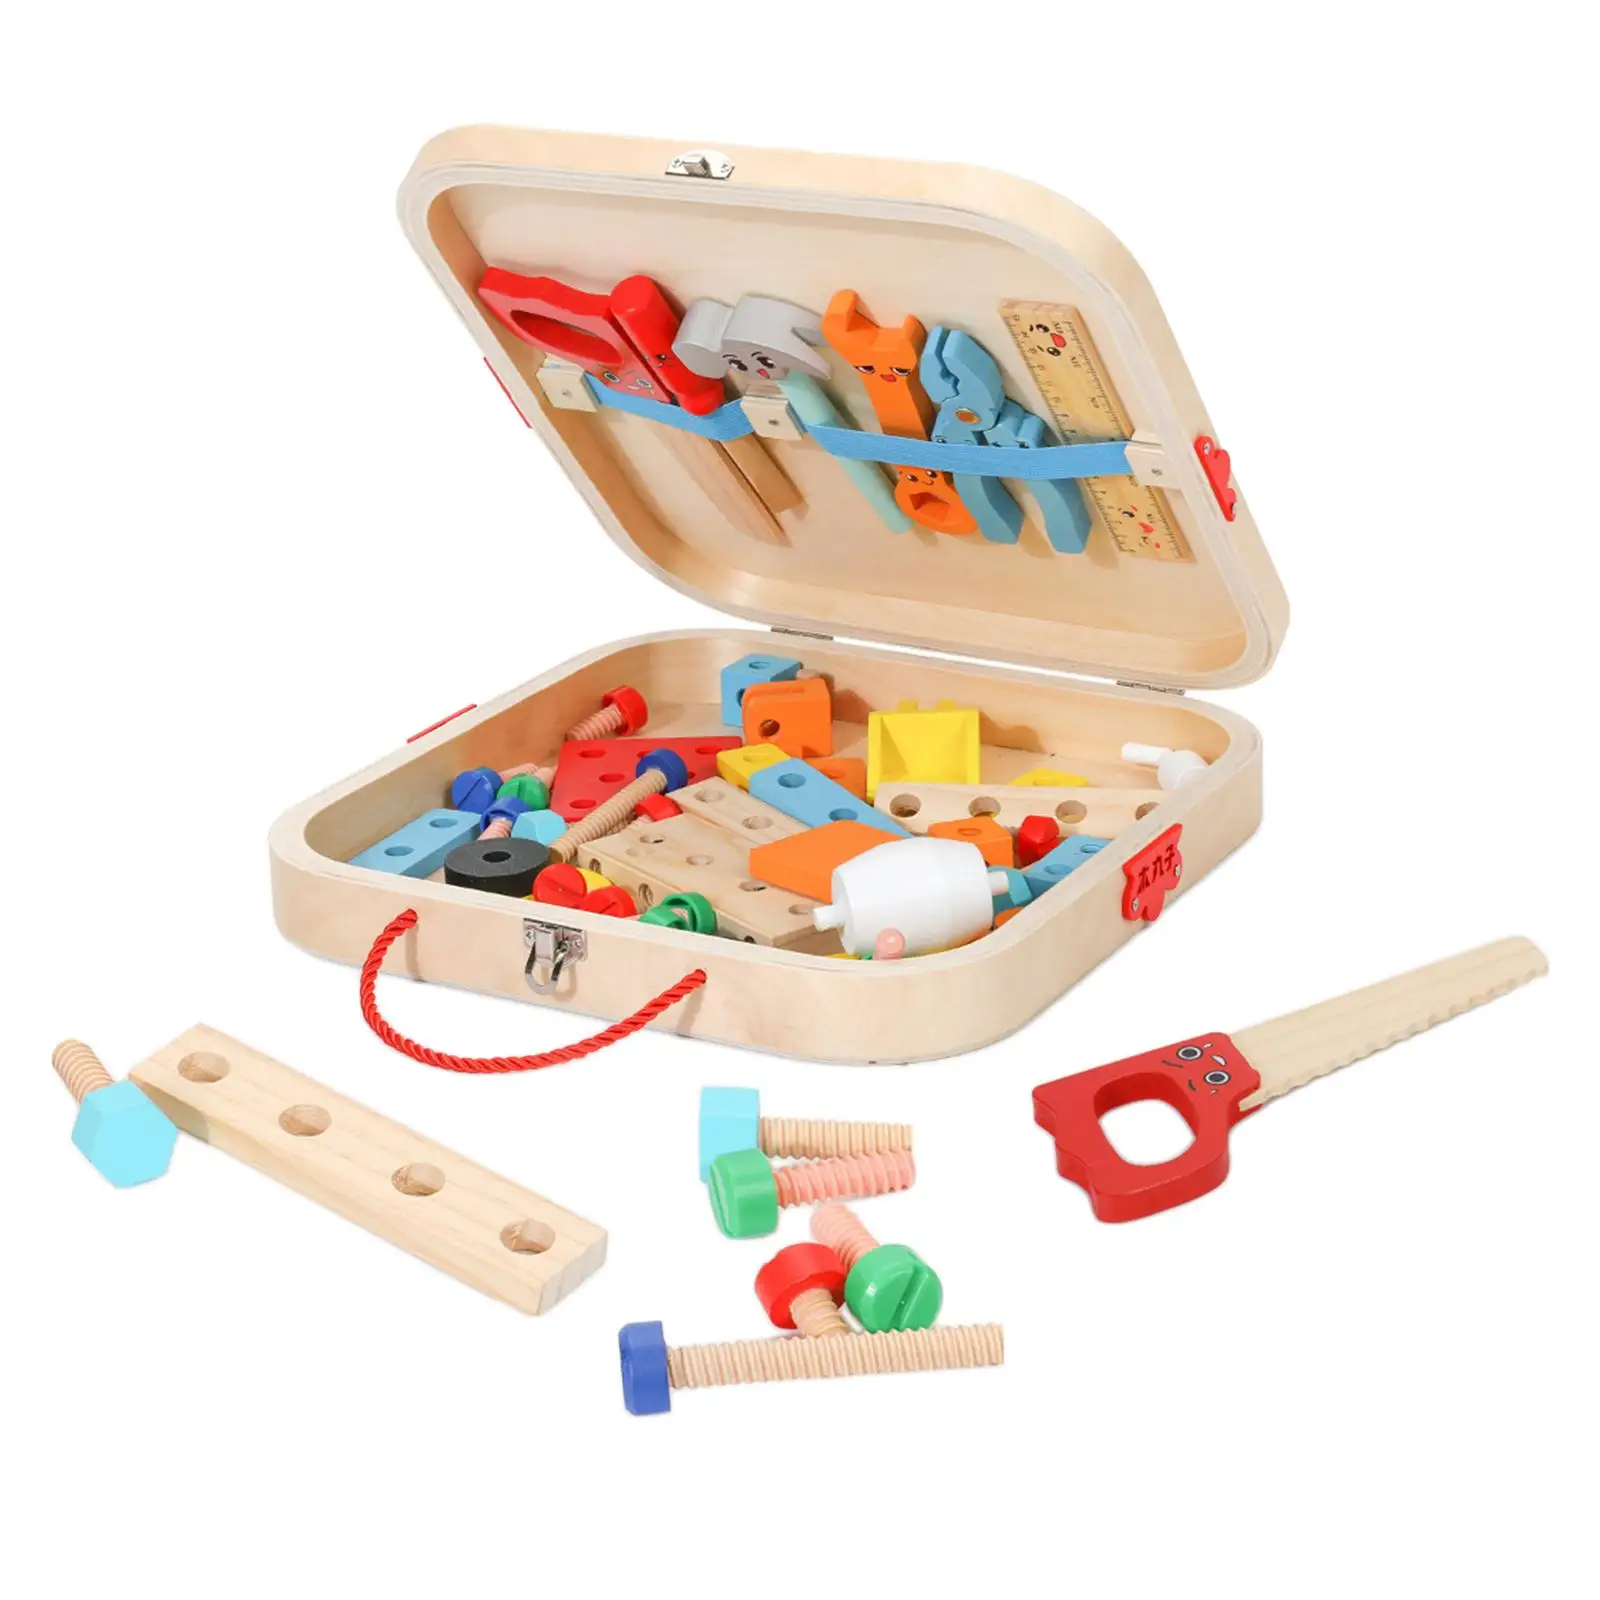 Kids Tool Set Smooth Wooden Toy Tool Box for Birthday Gift Home Living Room